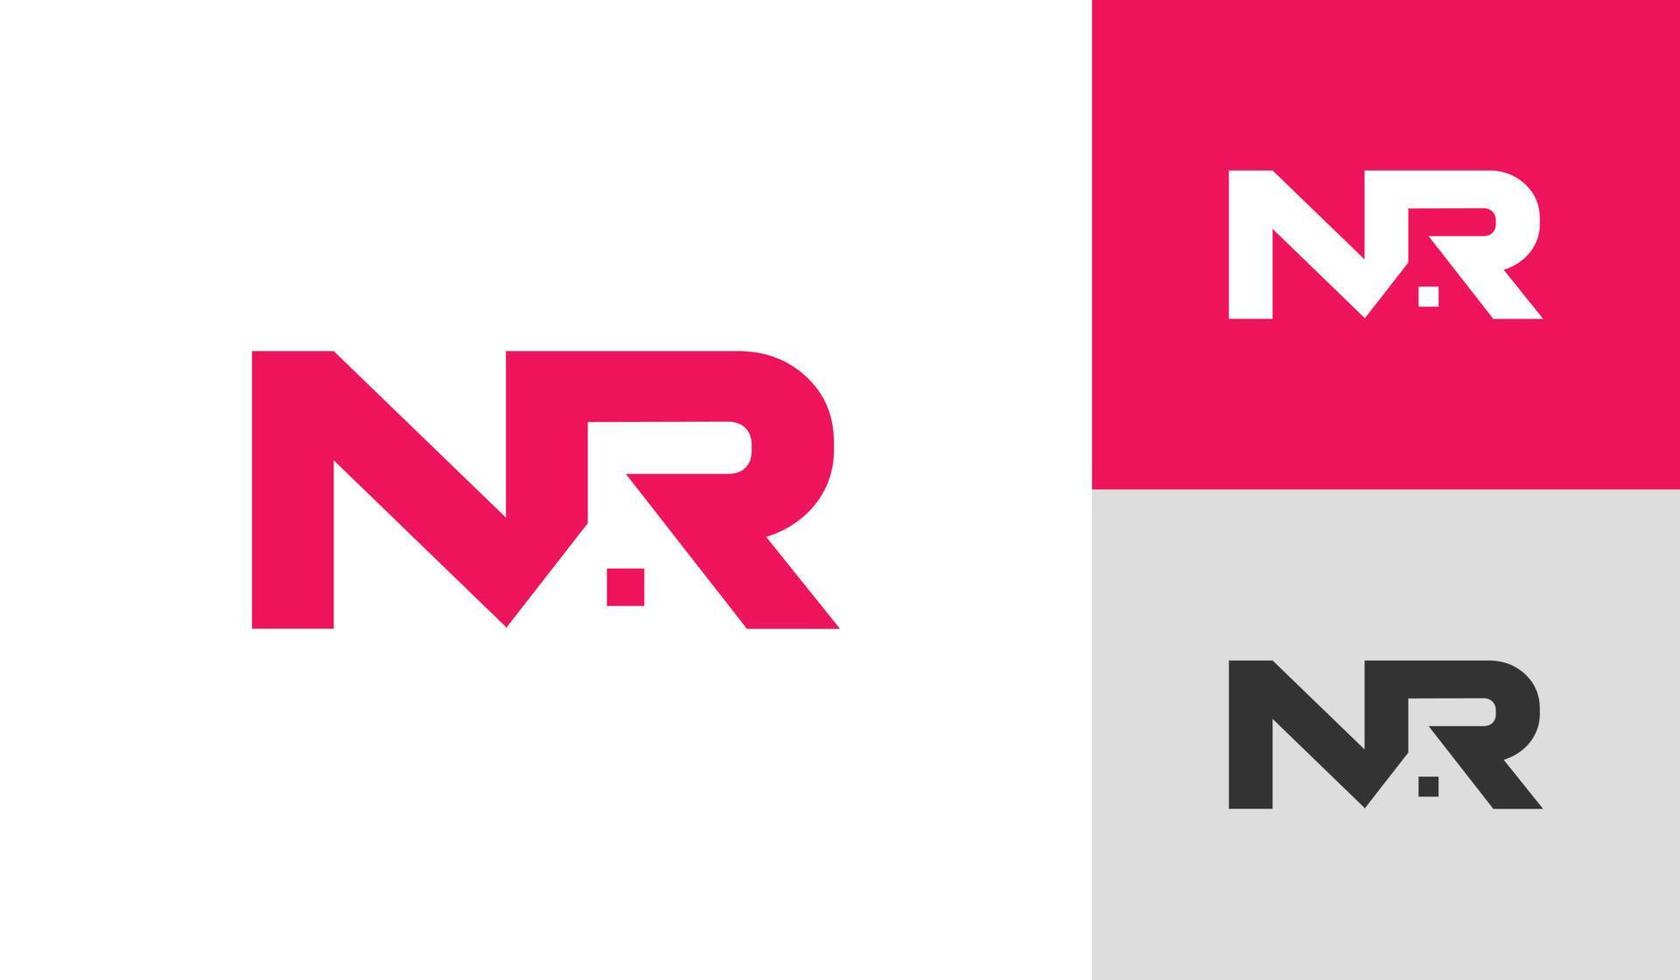 Letter NR logo with house roof vector